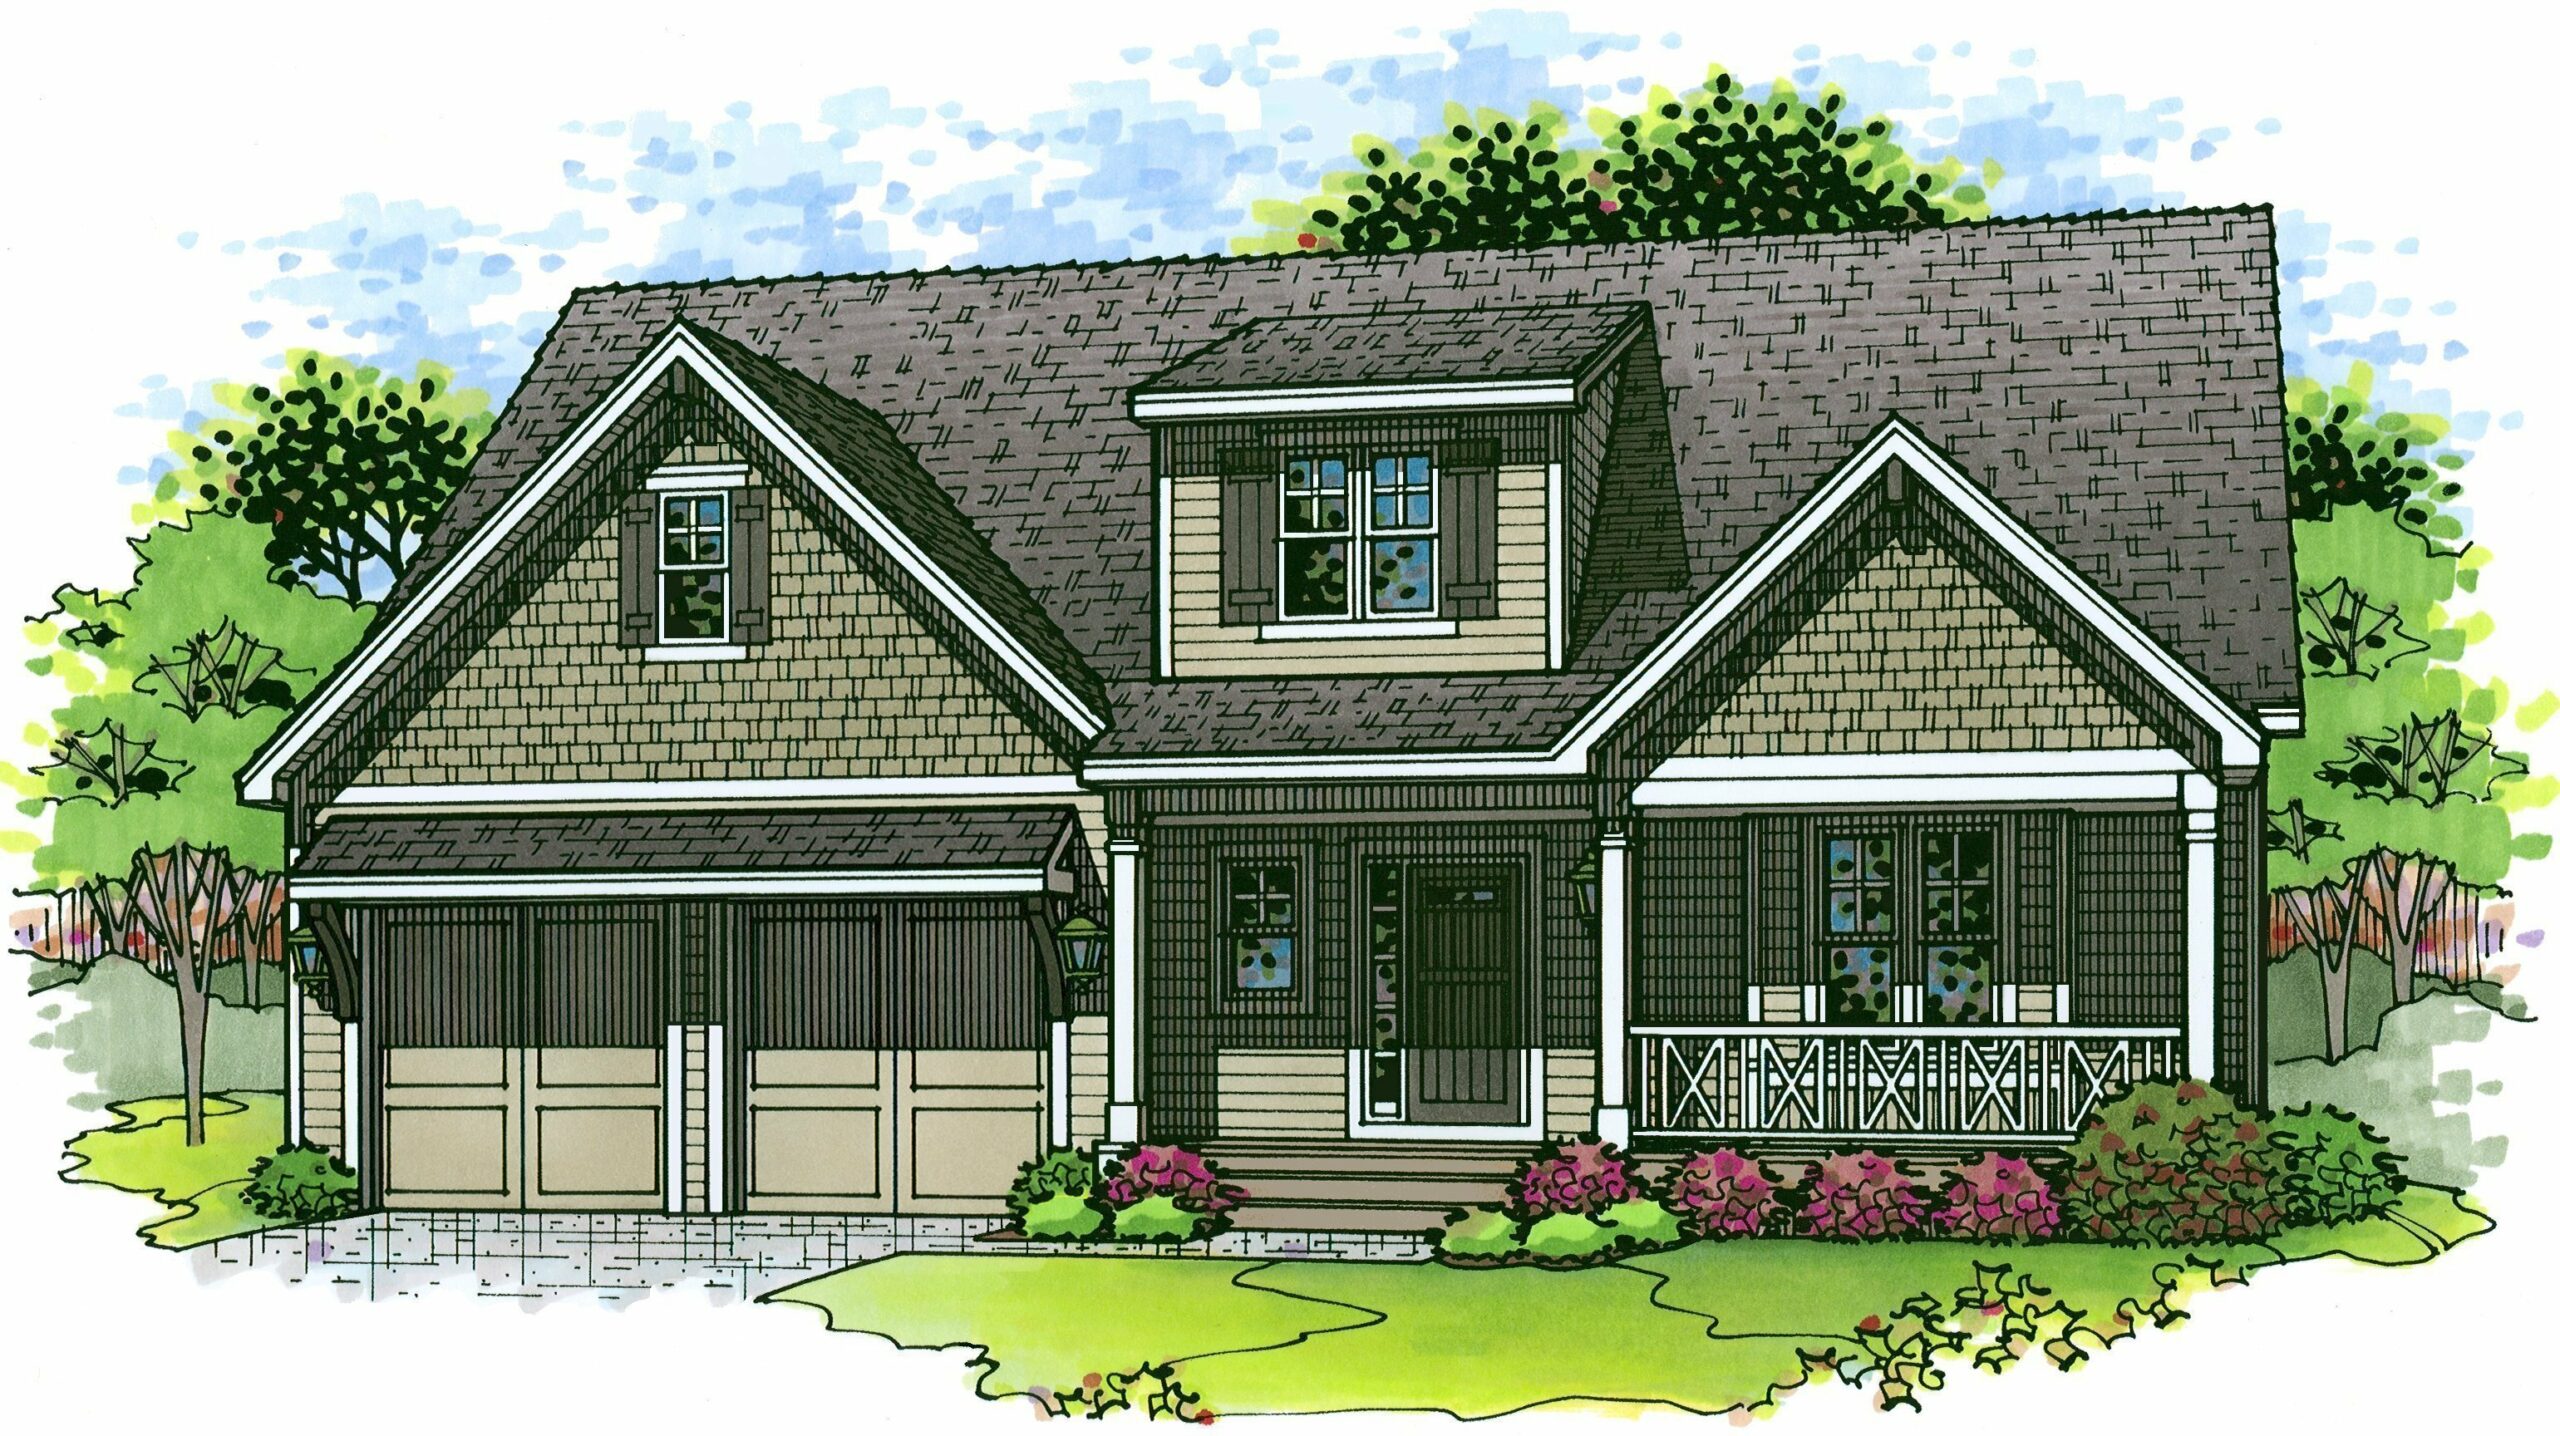 Rendering of the front elevation of the Persimmon model from Lambie Homes